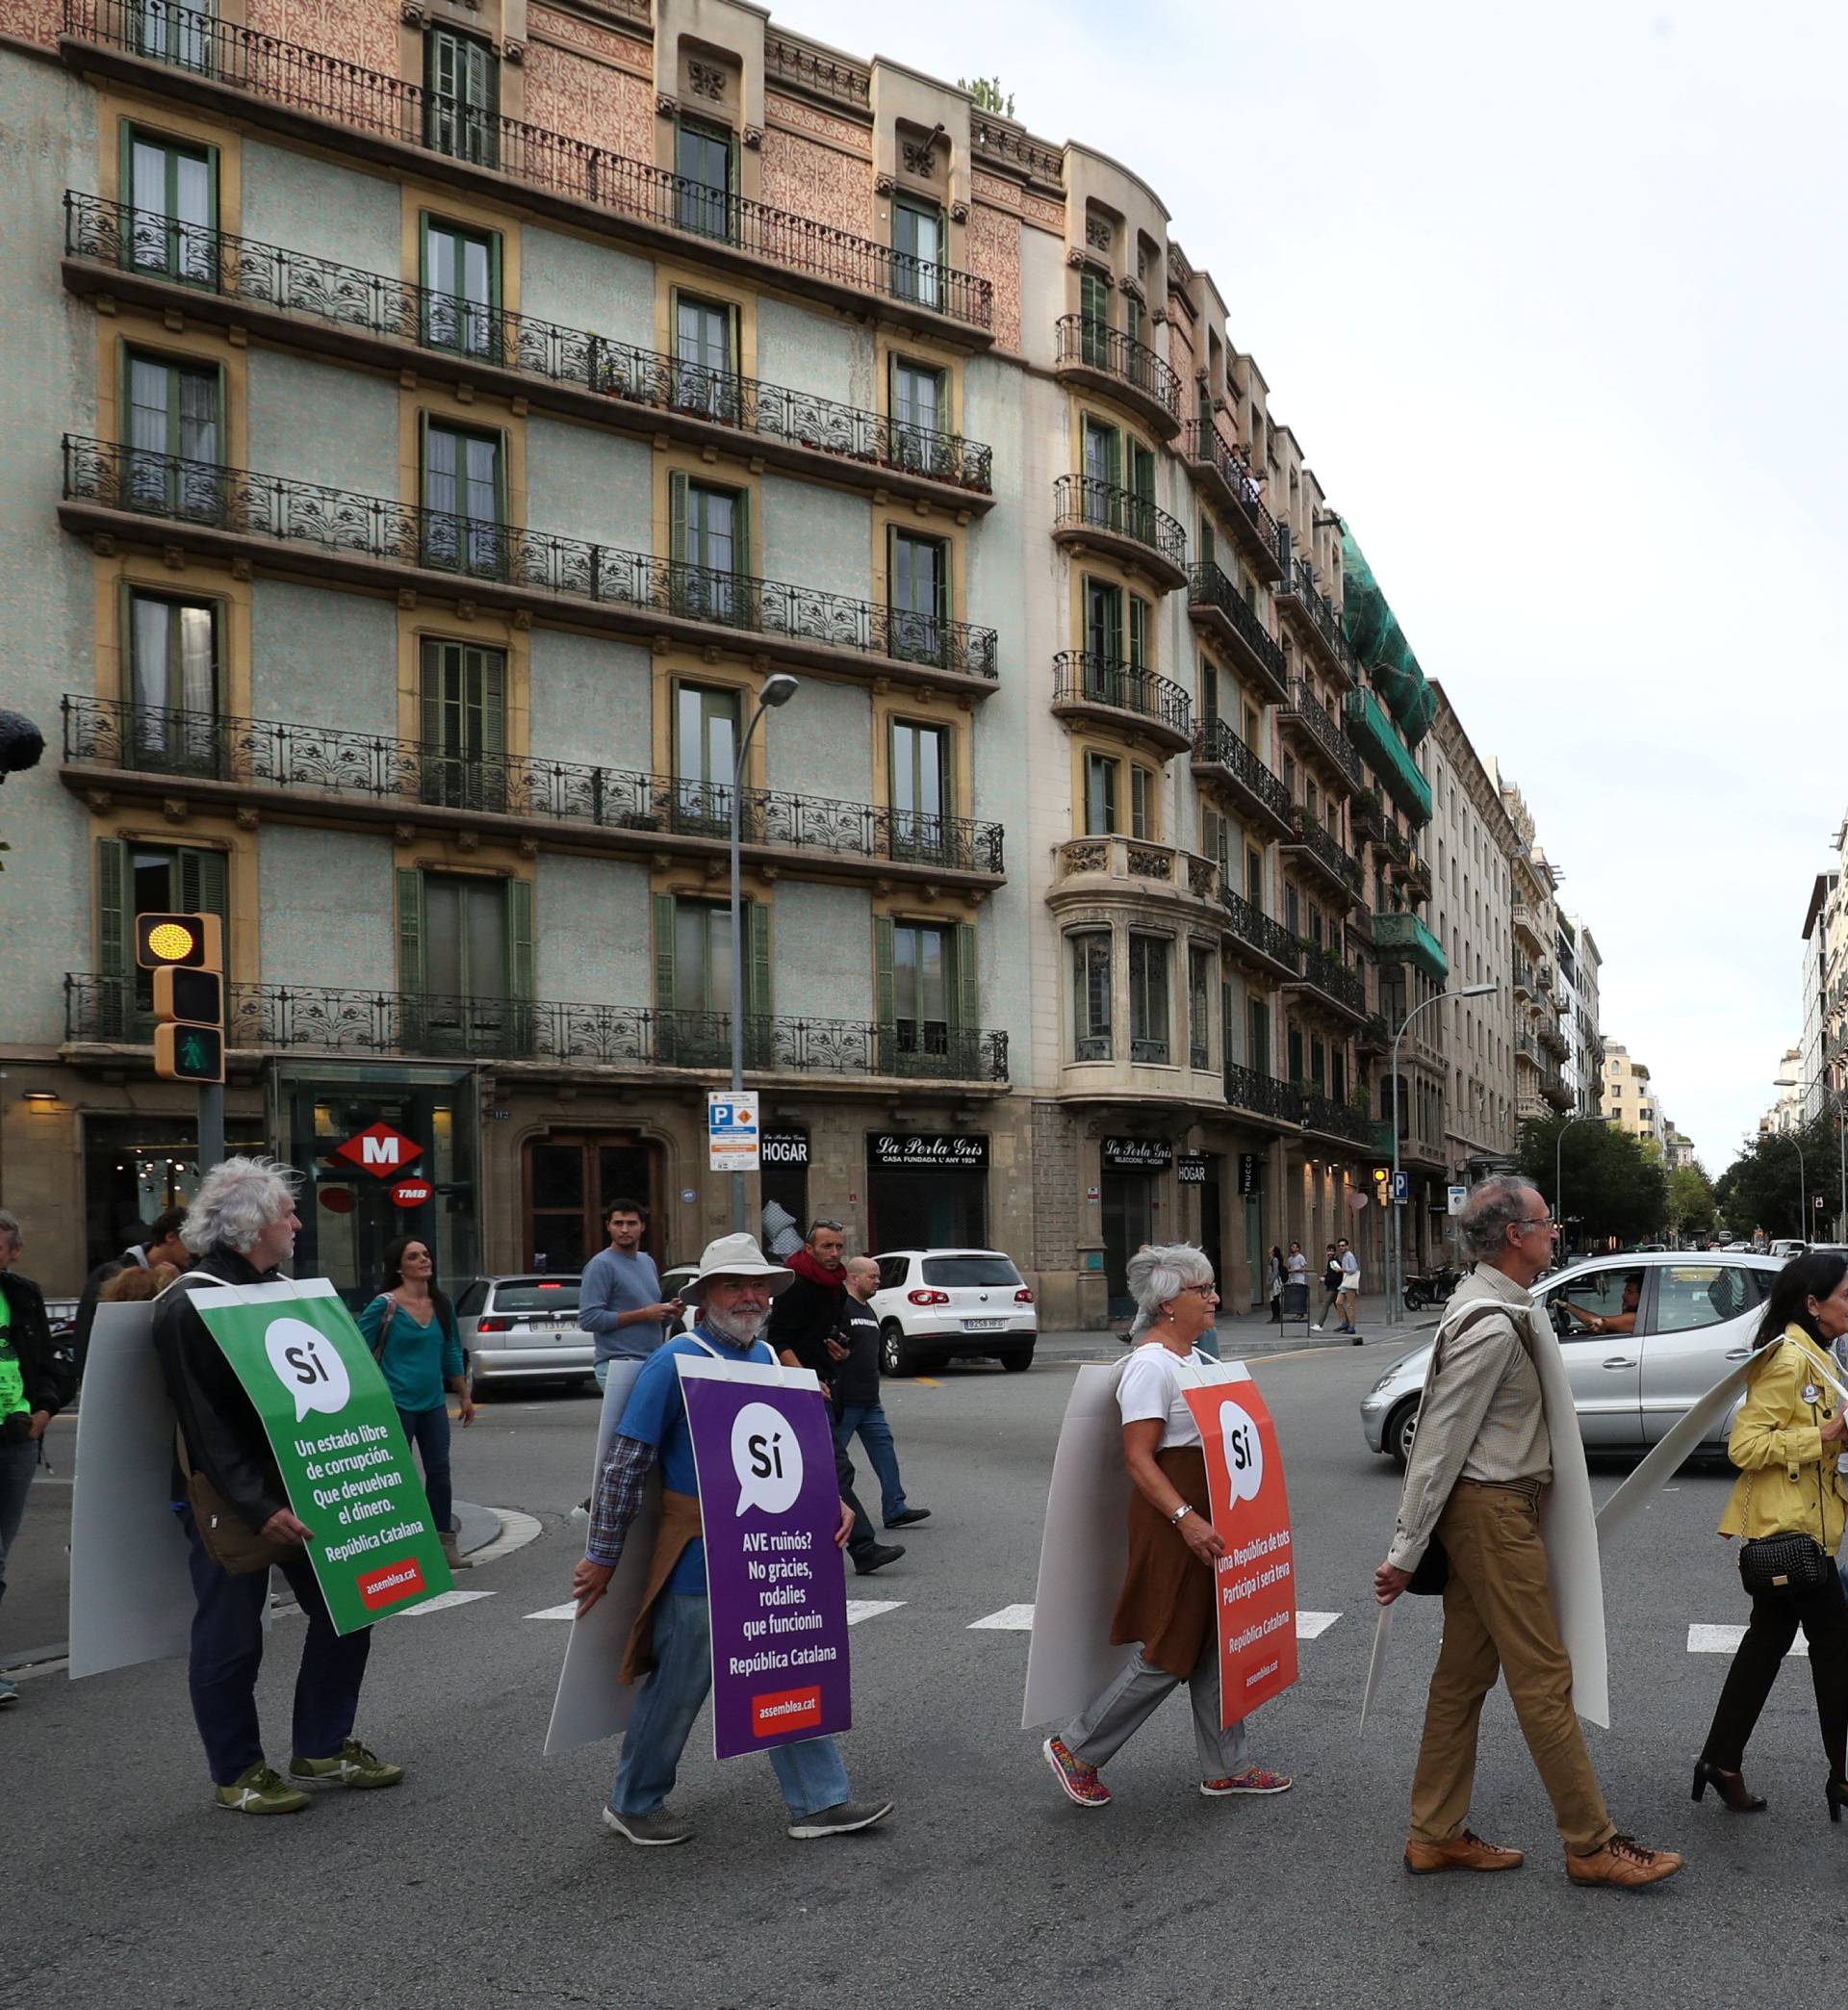 Catalan pro-independence supporters march while they distribute leaflets for the referendum on October 1 by Rambla de Catalunya in Barcelona